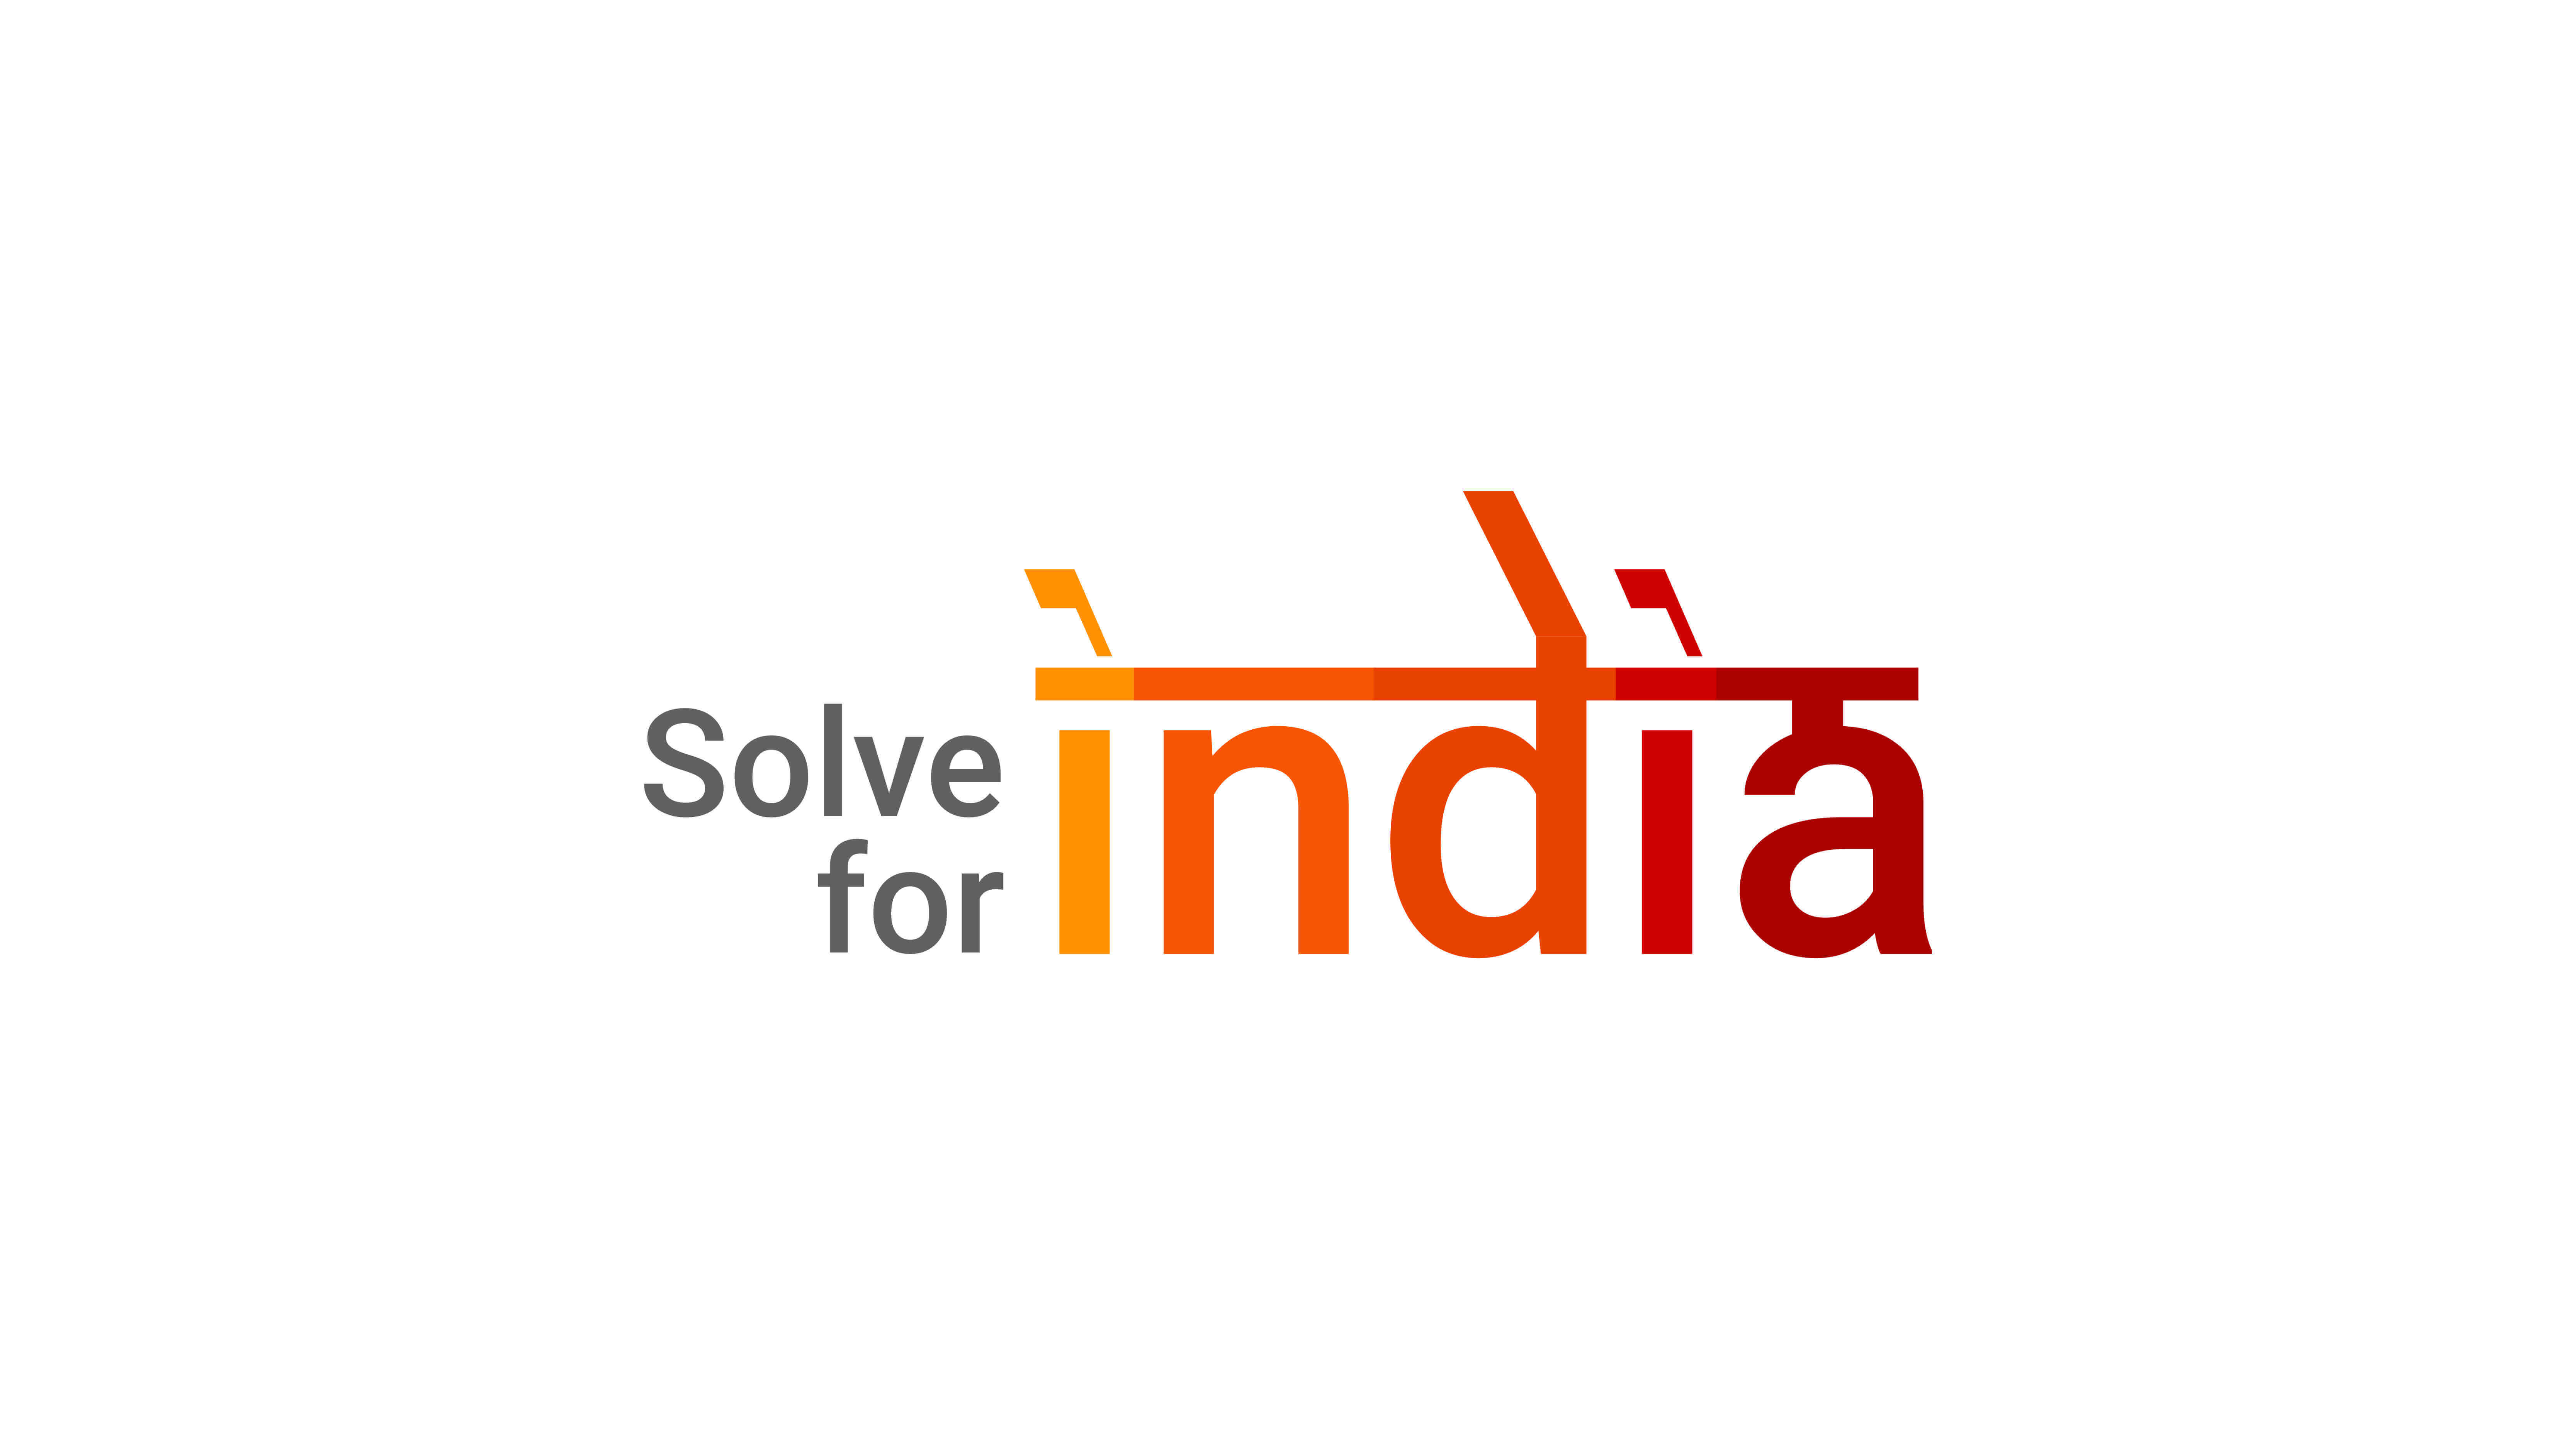 Solve for India Mentored by Google 2018